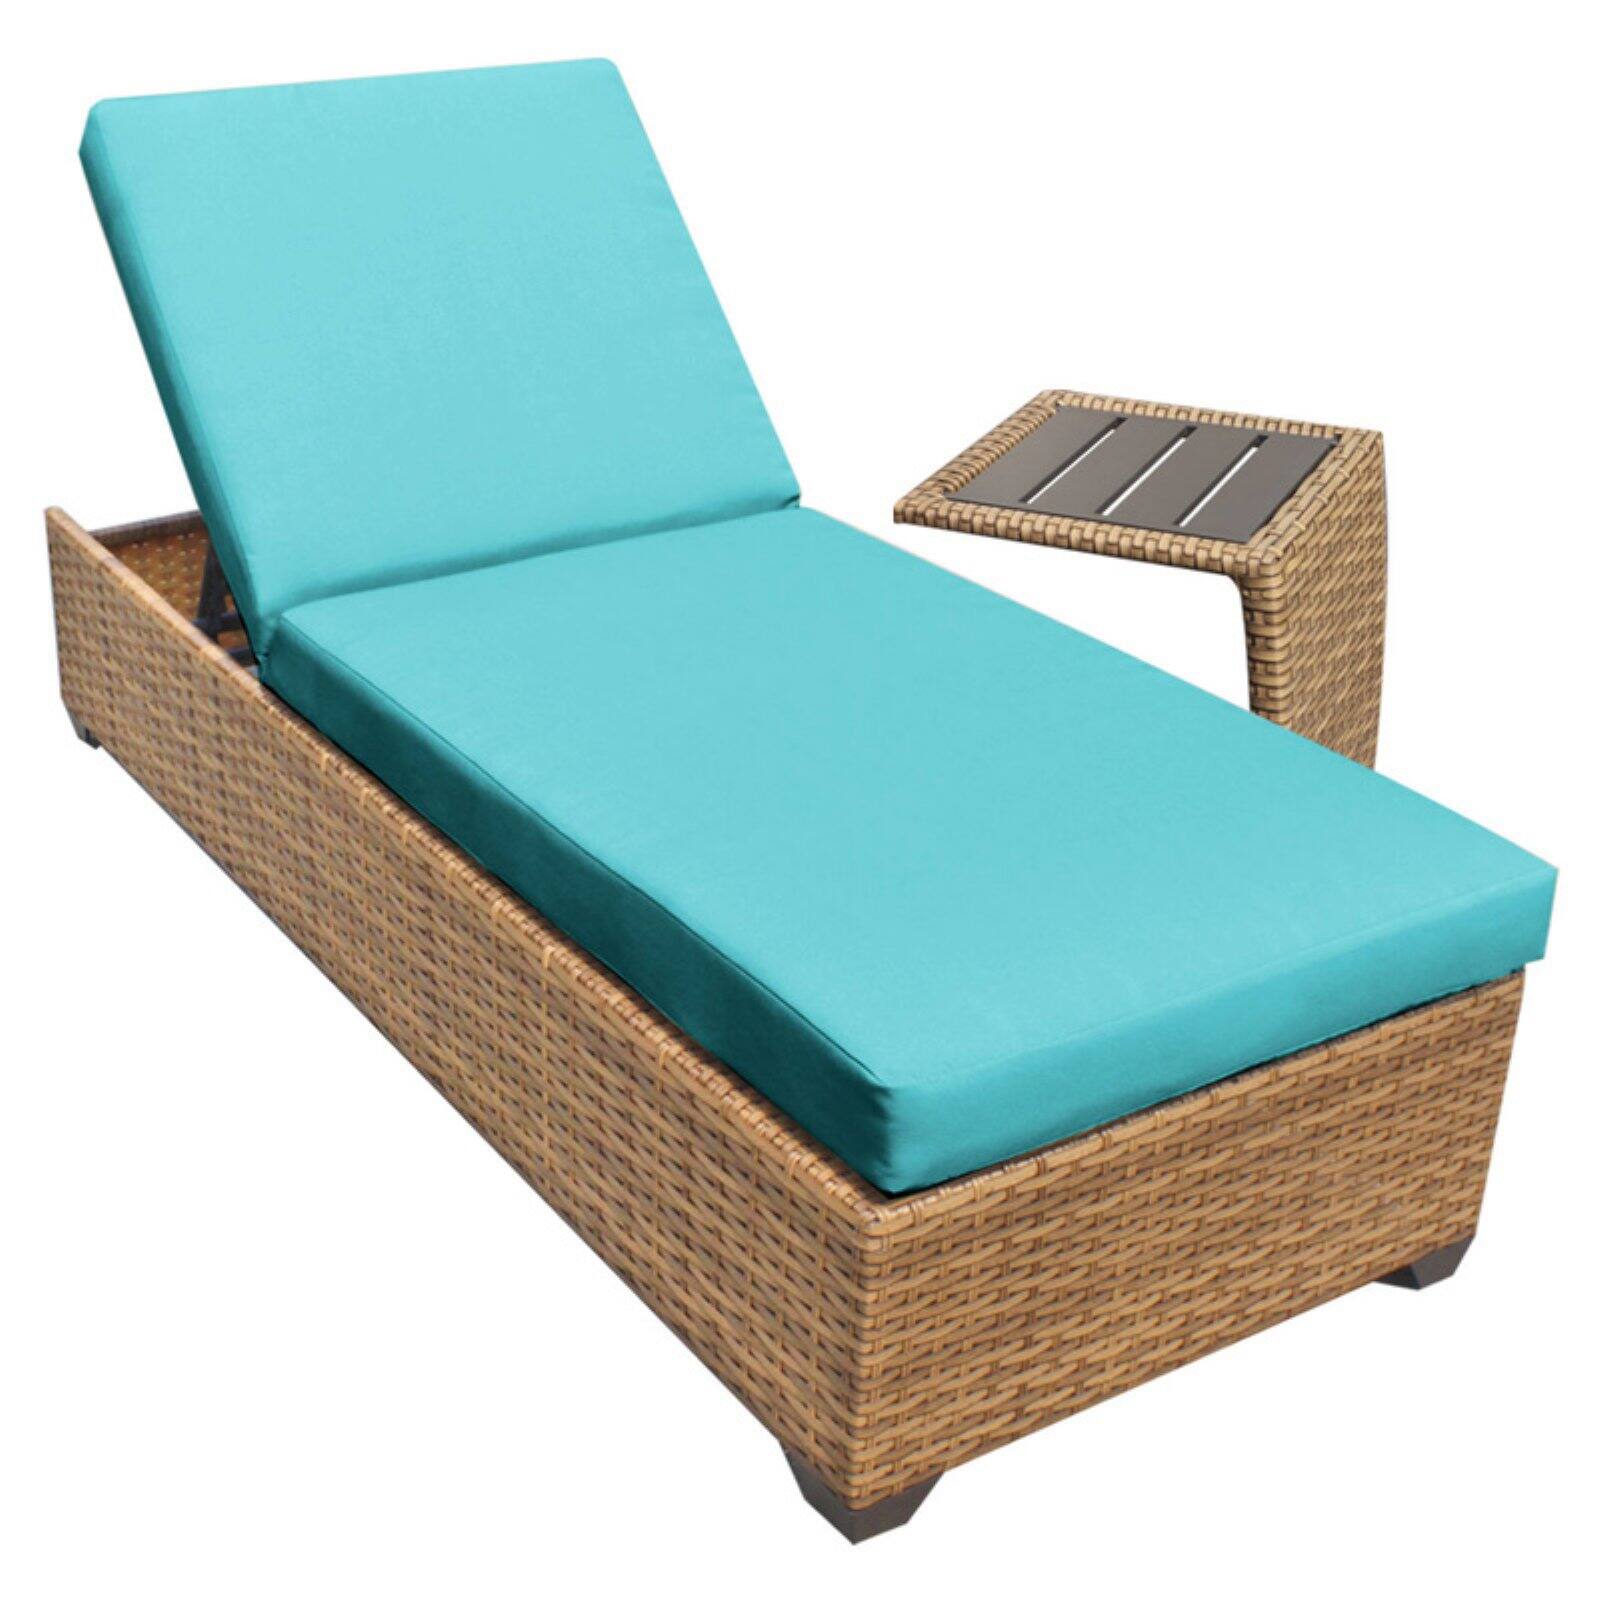 TK Classics Laguna Outdoor Chaise Lounge with Side Table - Set of 2 Cushion Covers - image 2 of 2